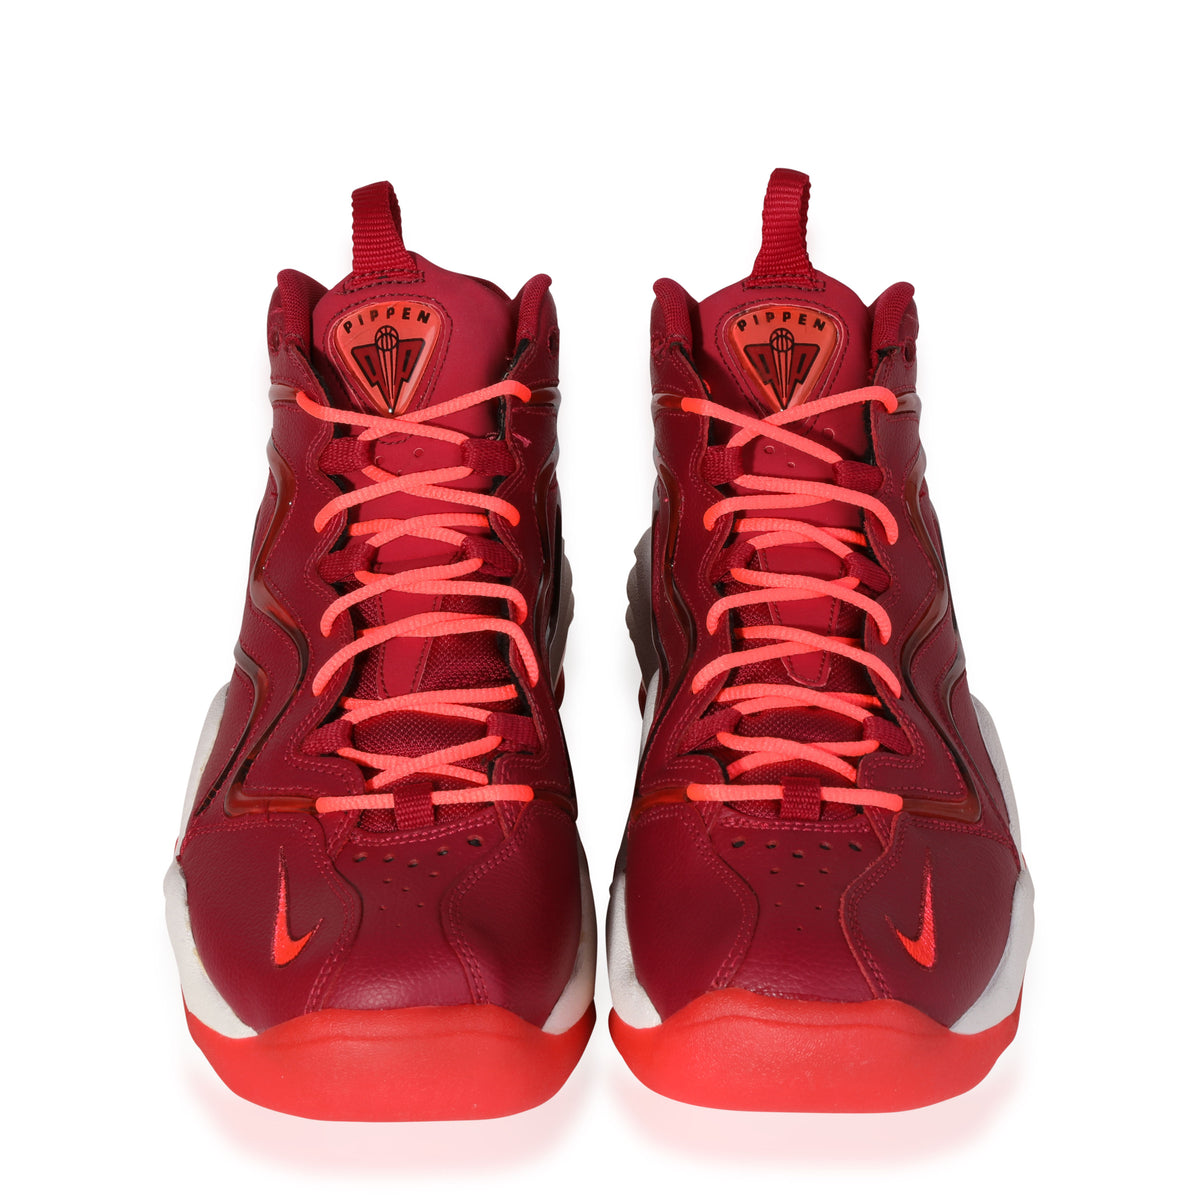 Nike -  Air Pippen 1 'Noble Red' (11 US)